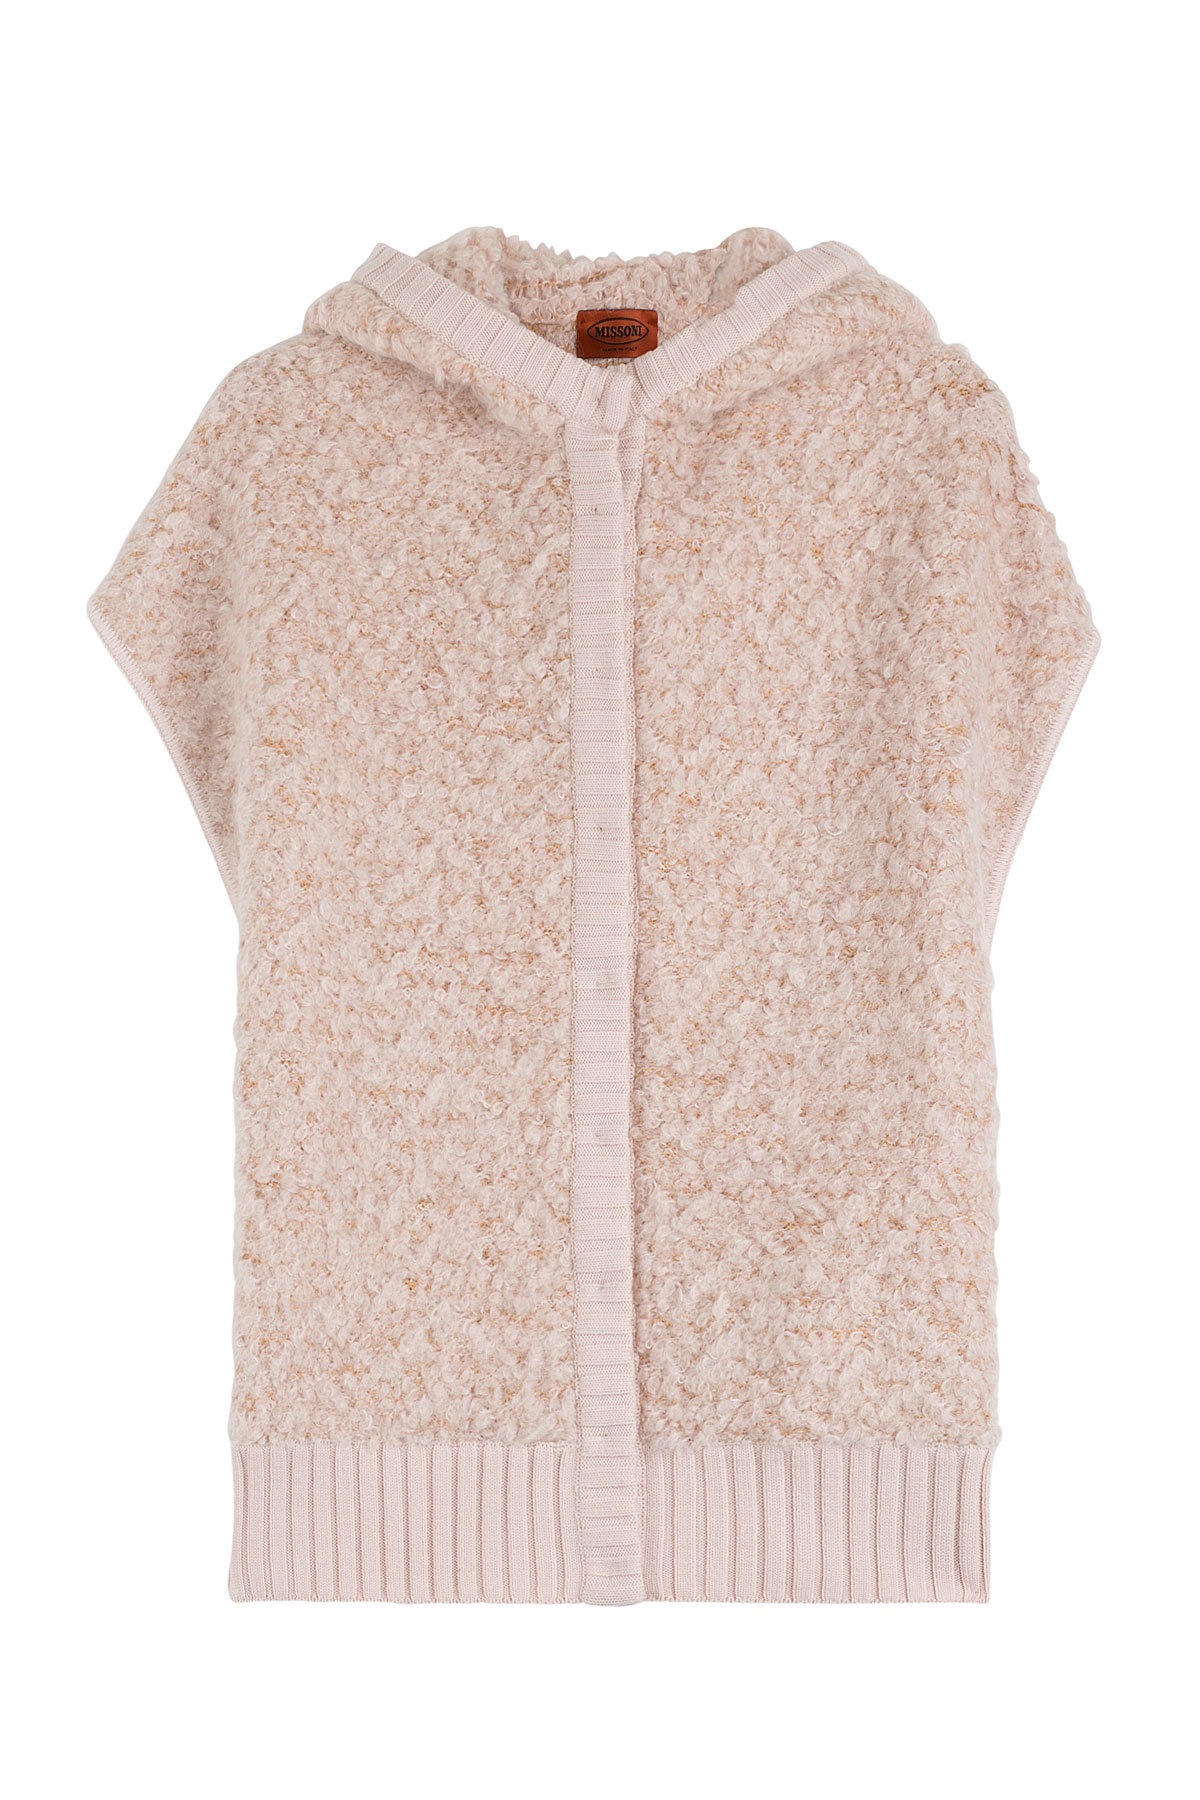 Missoni - Oversized Vest with Wool